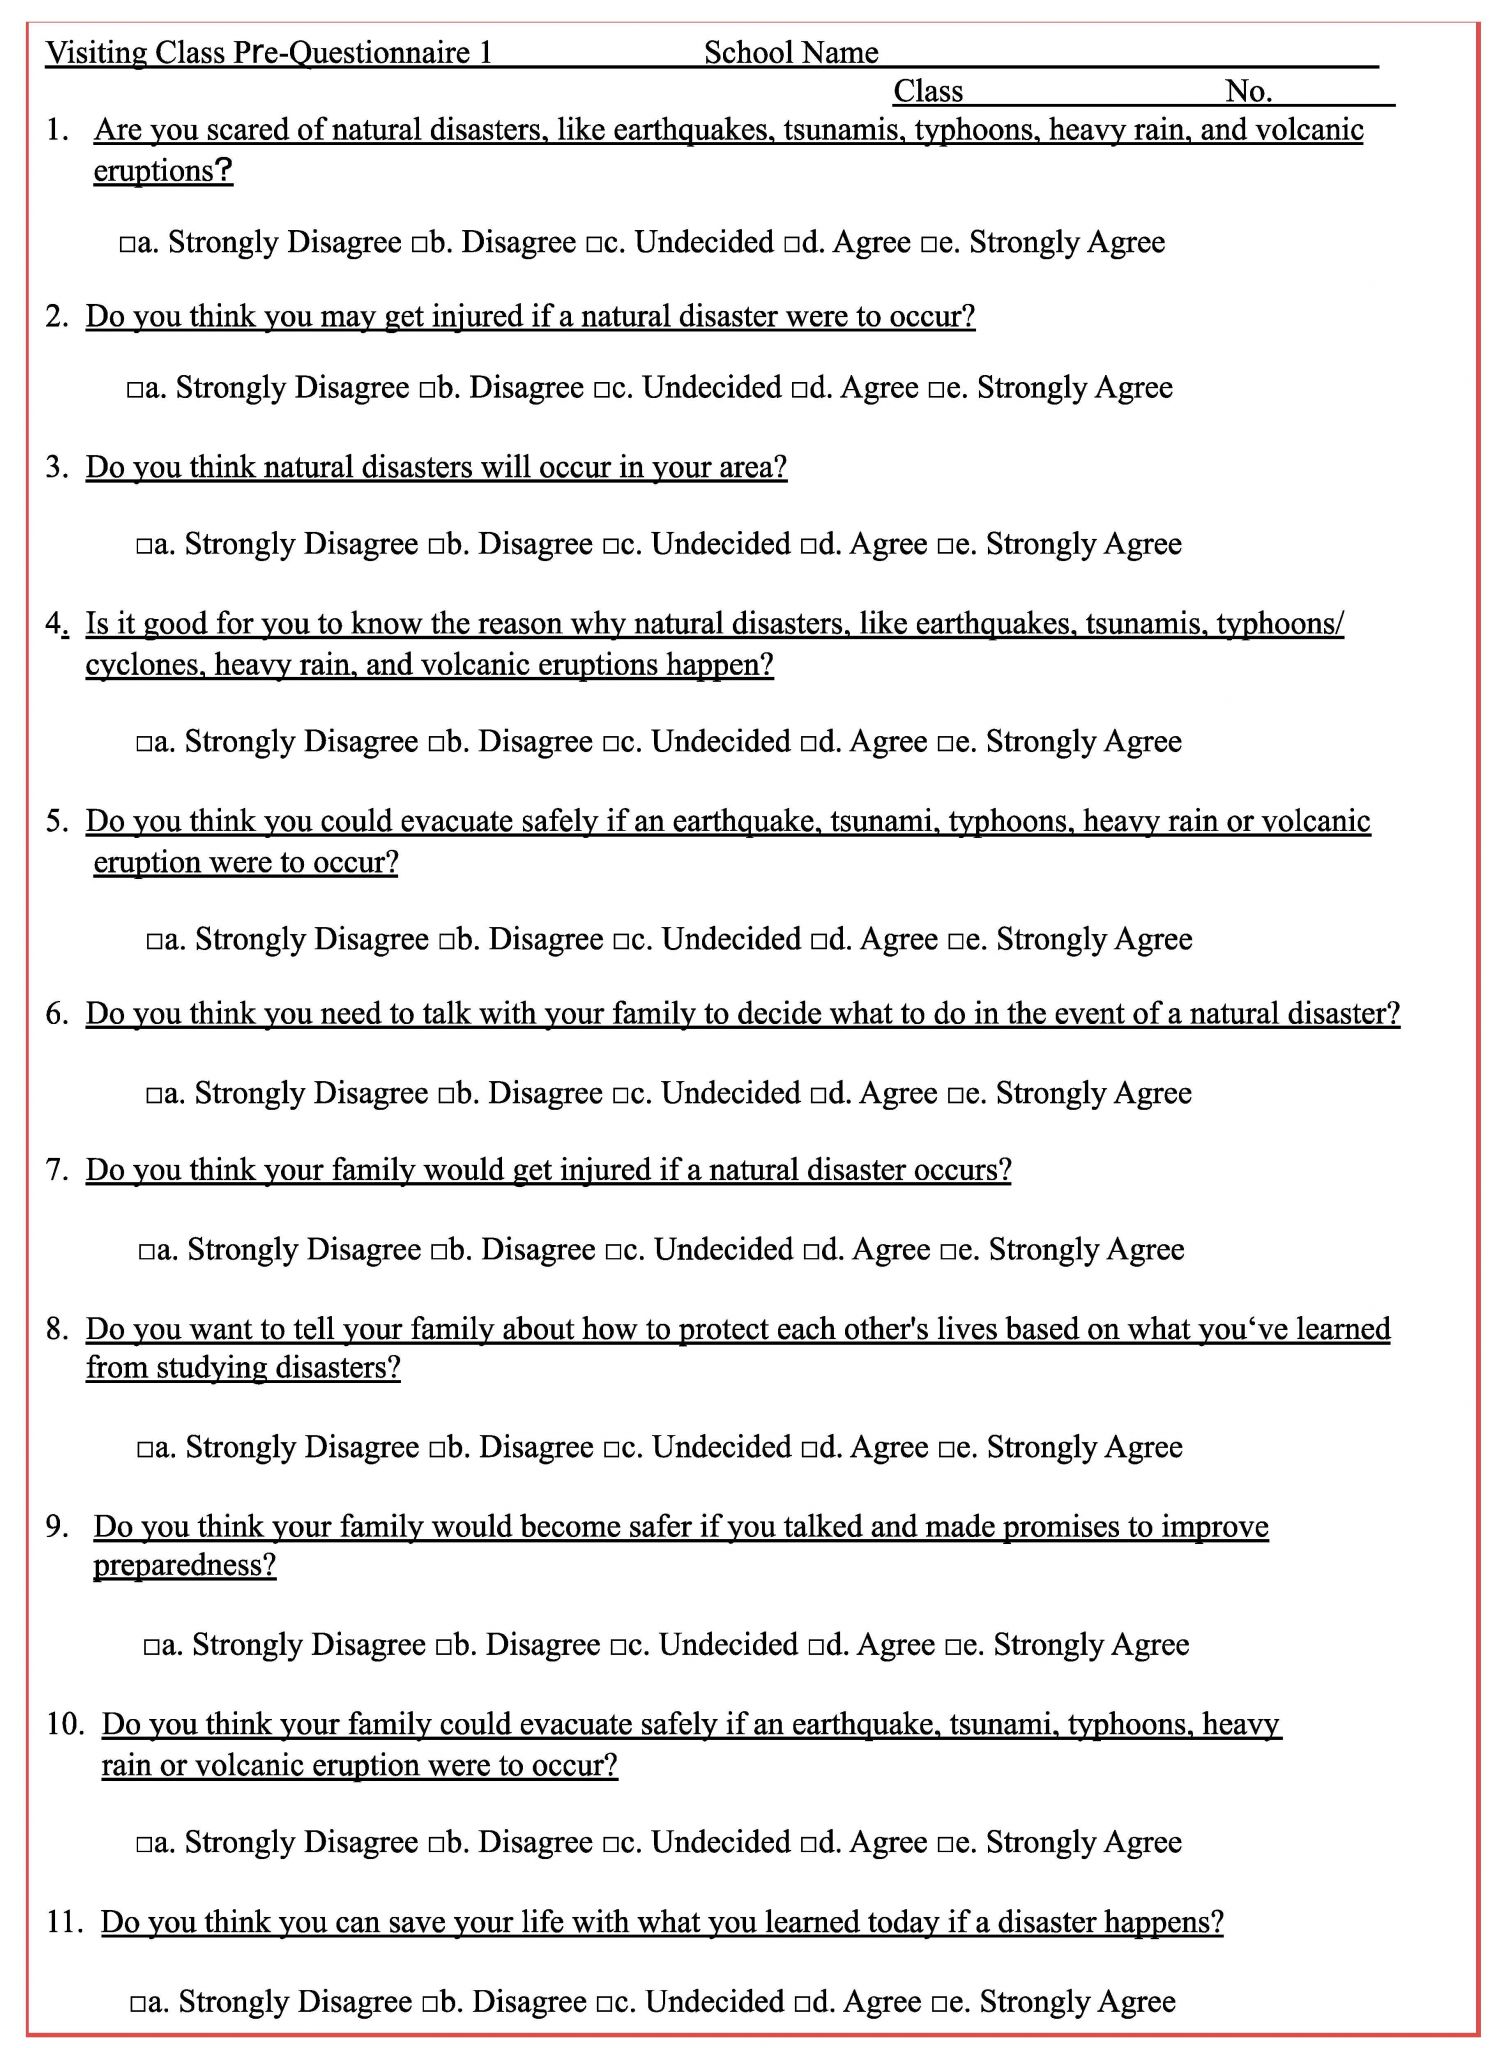 Foundations Of Government Worksheet Answers and Geosciences Free Full Text